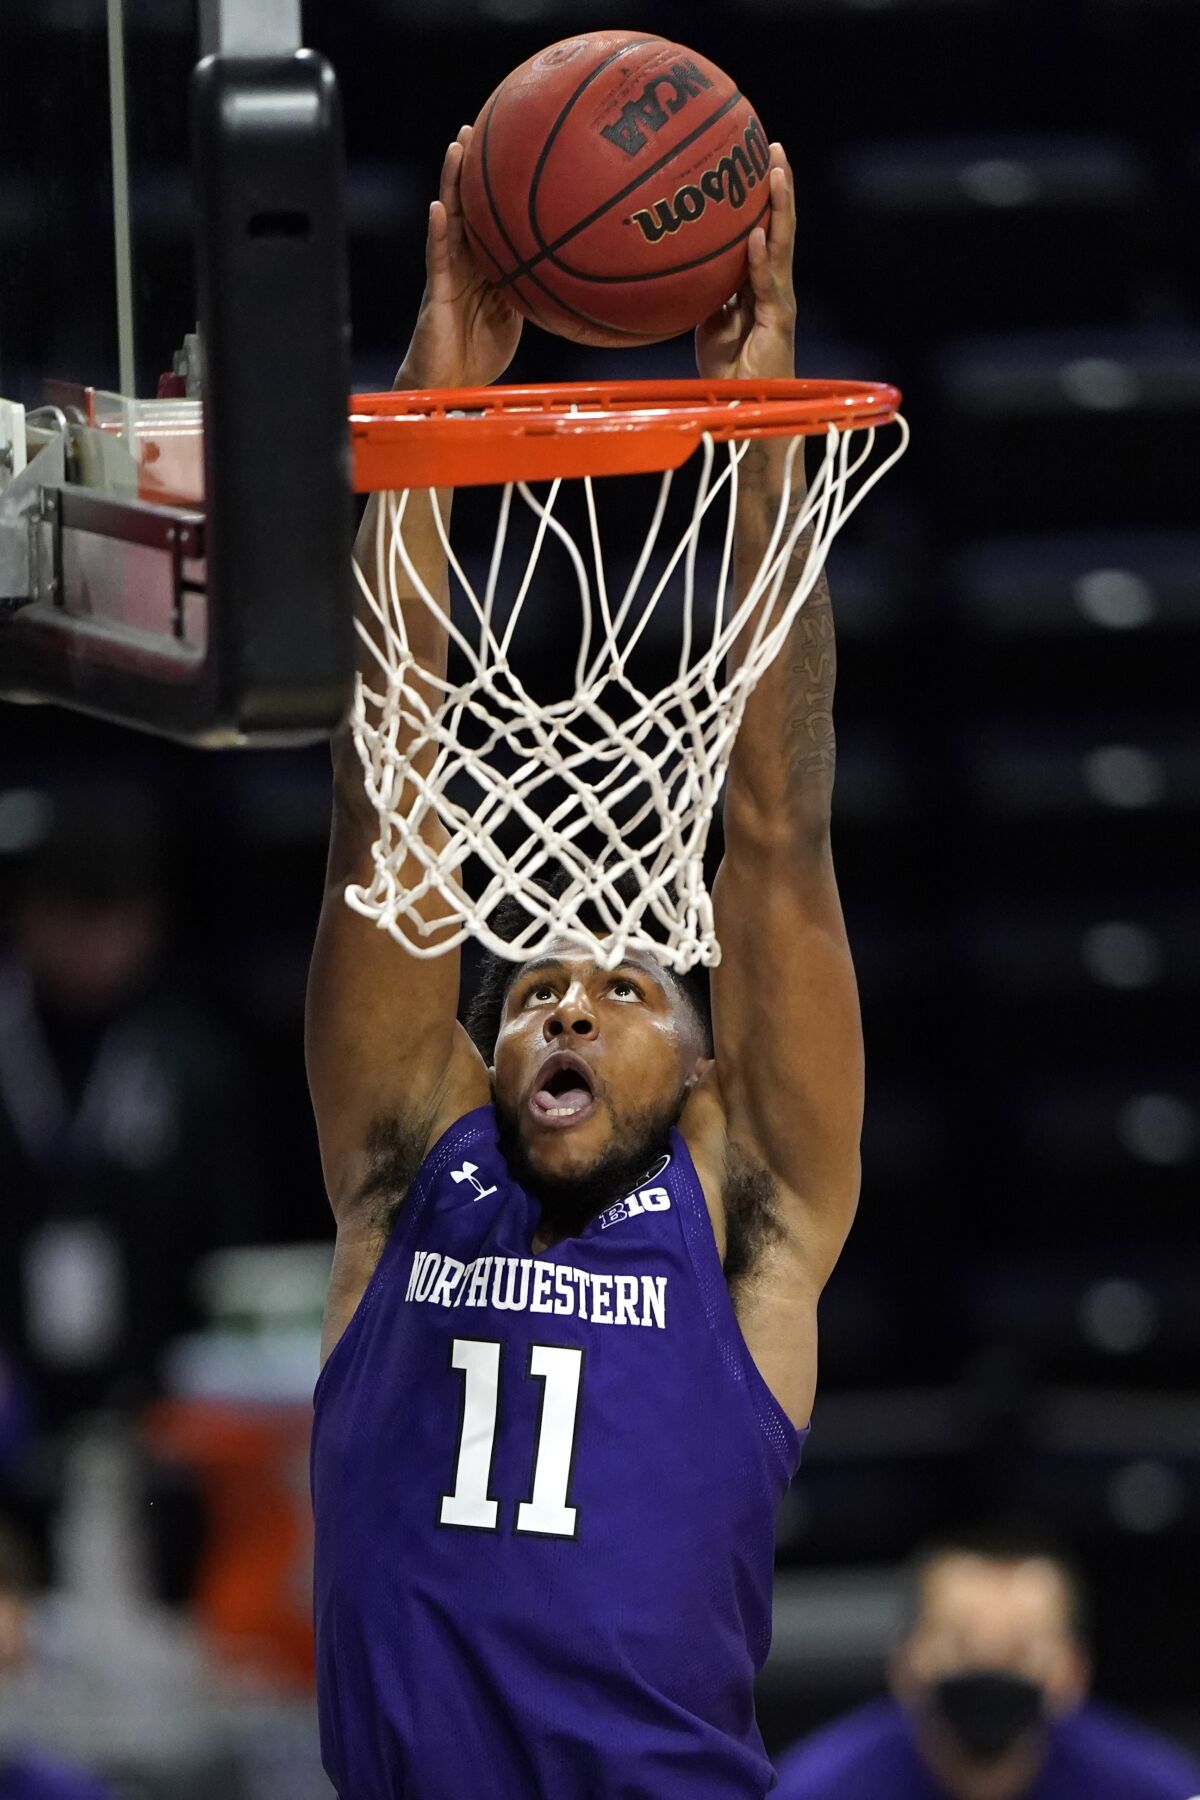 Northwestern guard Anthony Gaines dunks against Chicago State during the second half of an NCAA college basketball game in Evanston, Ill., Saturday, Dec. 5, 2020. (AP Photo/Nam Y. Huh)